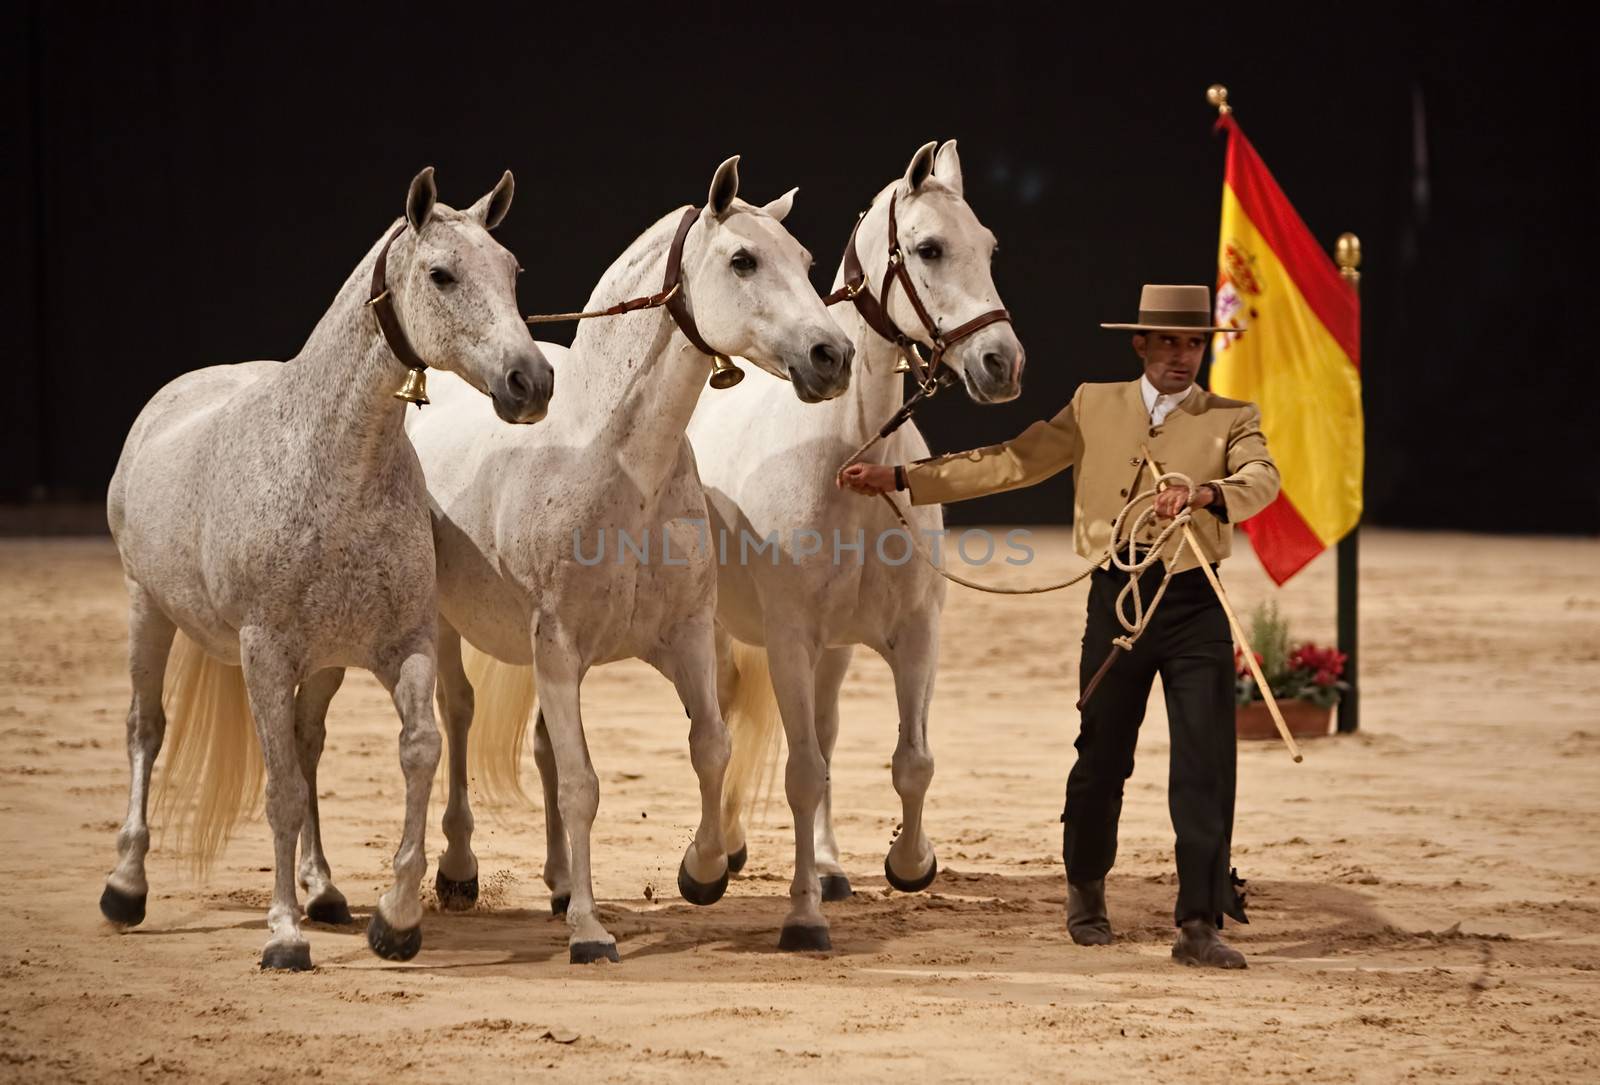 Coin, Malaga province, SPAIN - 11 march 2010: Three Spanish mares of pure race called also cobra of three mares taking part during an exercise of equestrian morphology in Coin, Malaga province, Andalusia, Spain